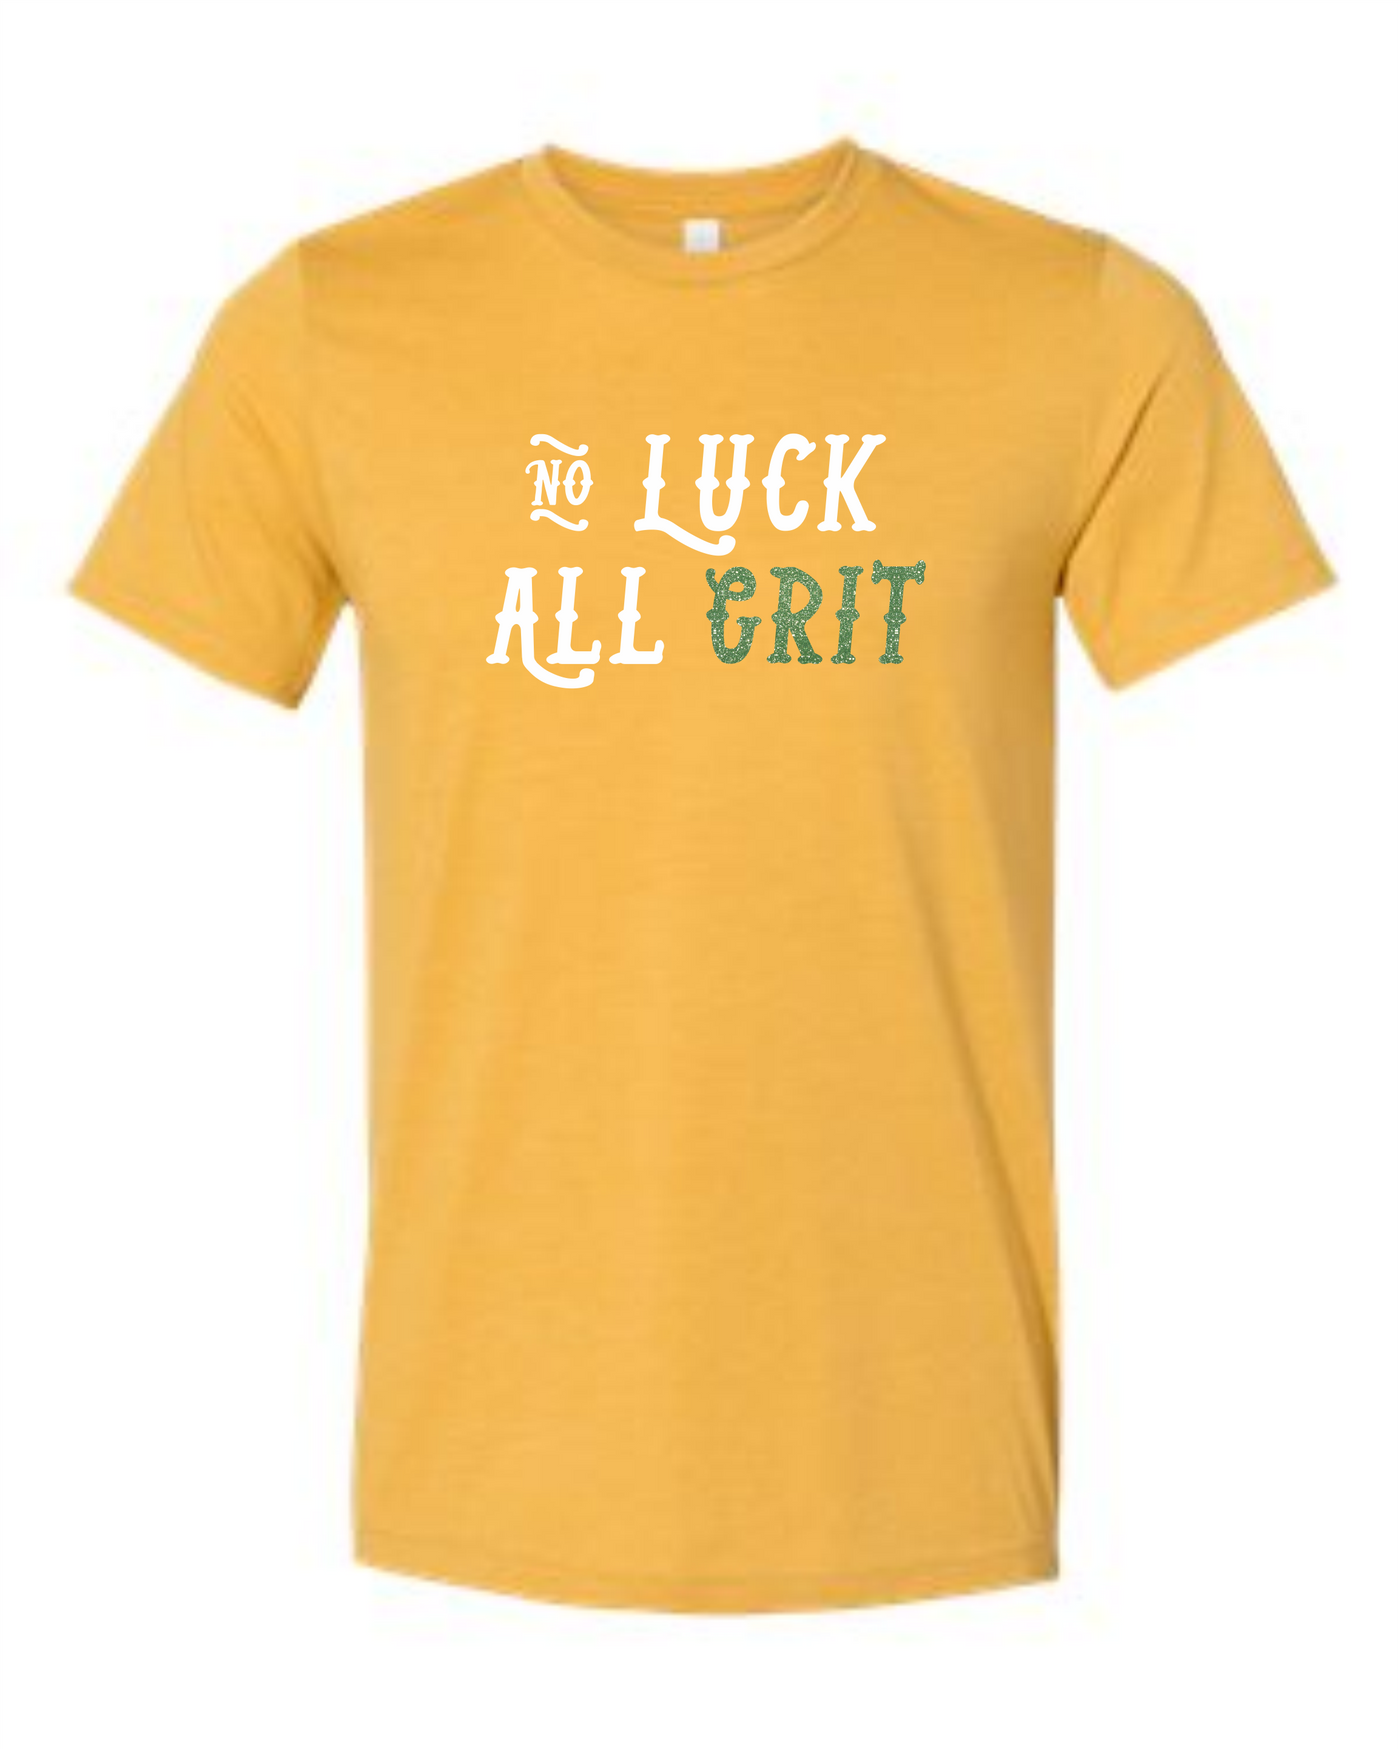 No Luck All Grit Short Sleeve Graphic T-shirt